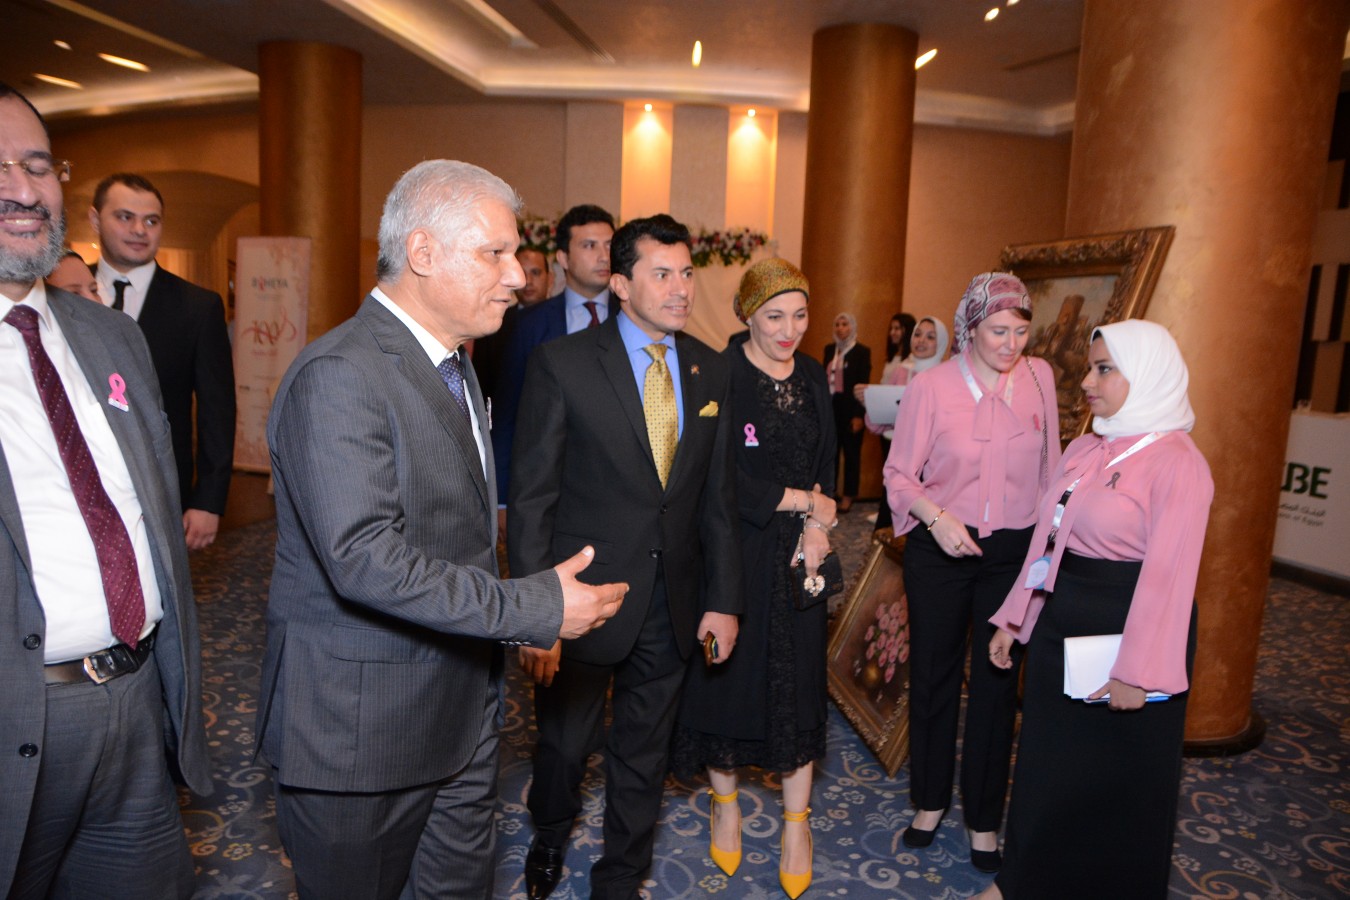 The Minister of Youth and Sports Attends Baheya’s Celebration of 100000 women